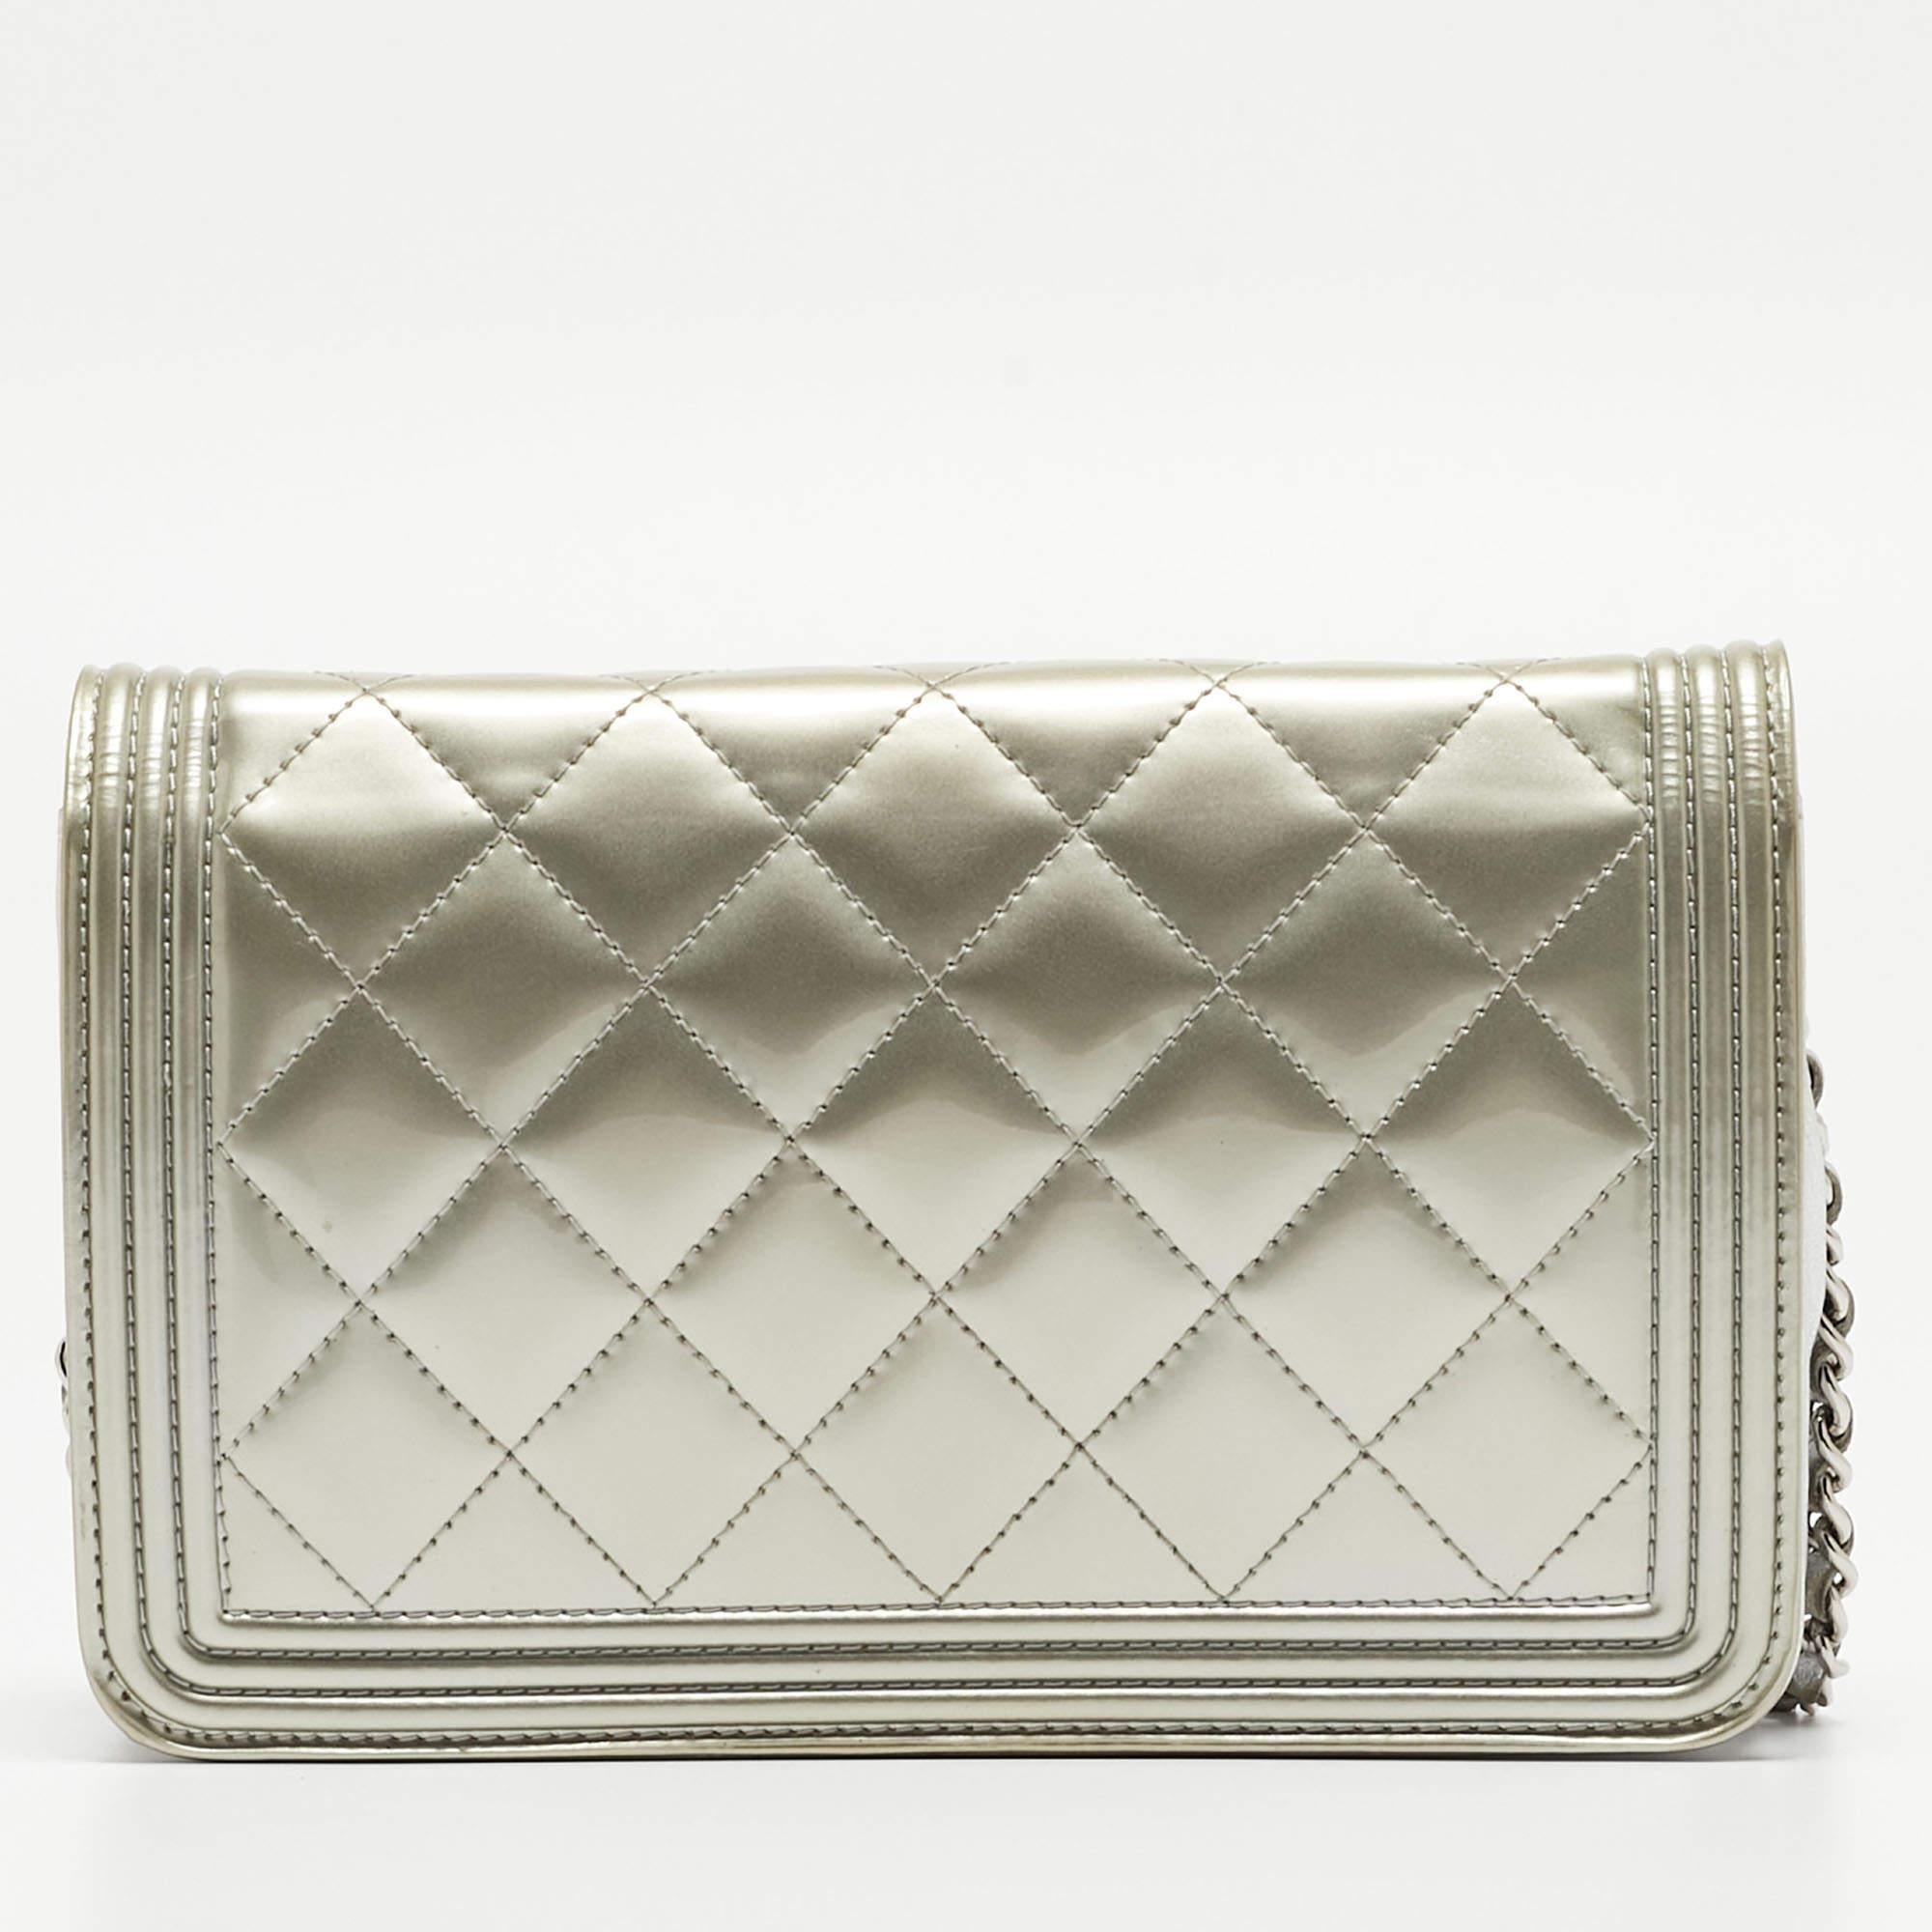 Chanel Pale Gold Quilted Patent Leather Boy WOC Bag 2